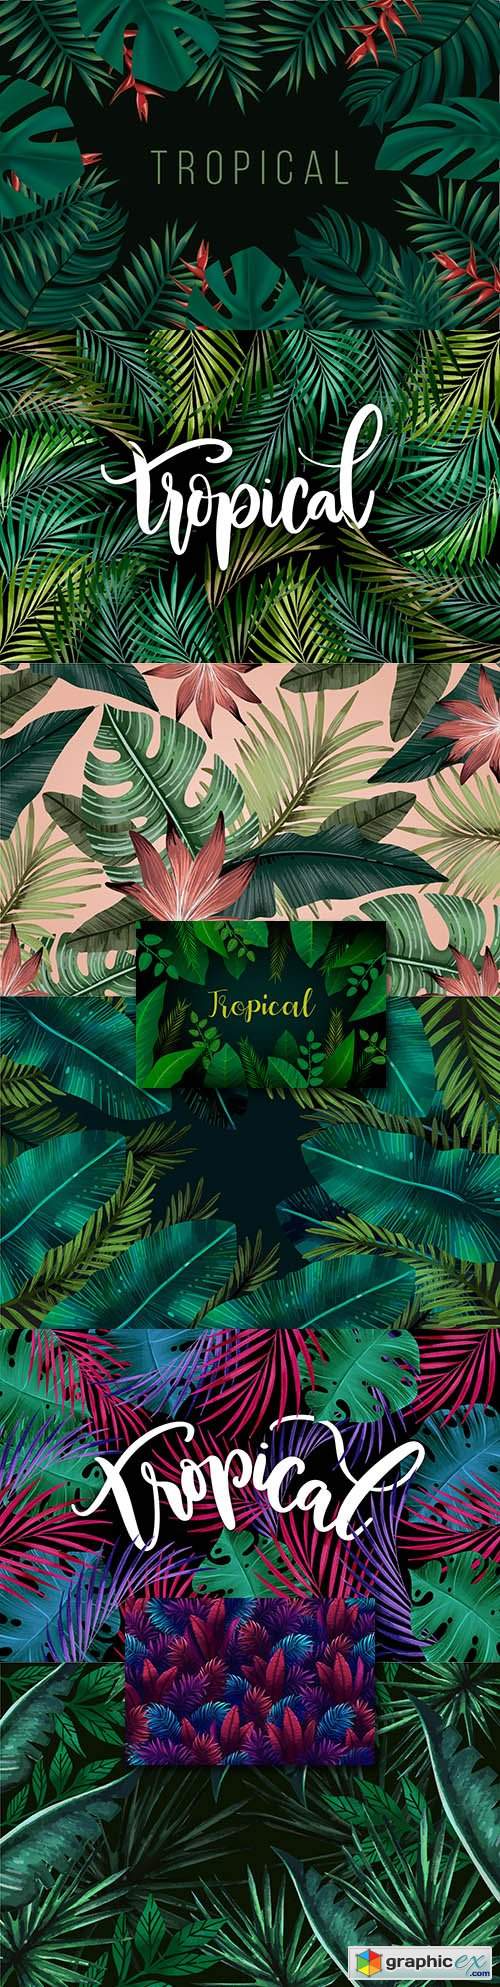  Summer tropical leaves and inscriptions decorative background 